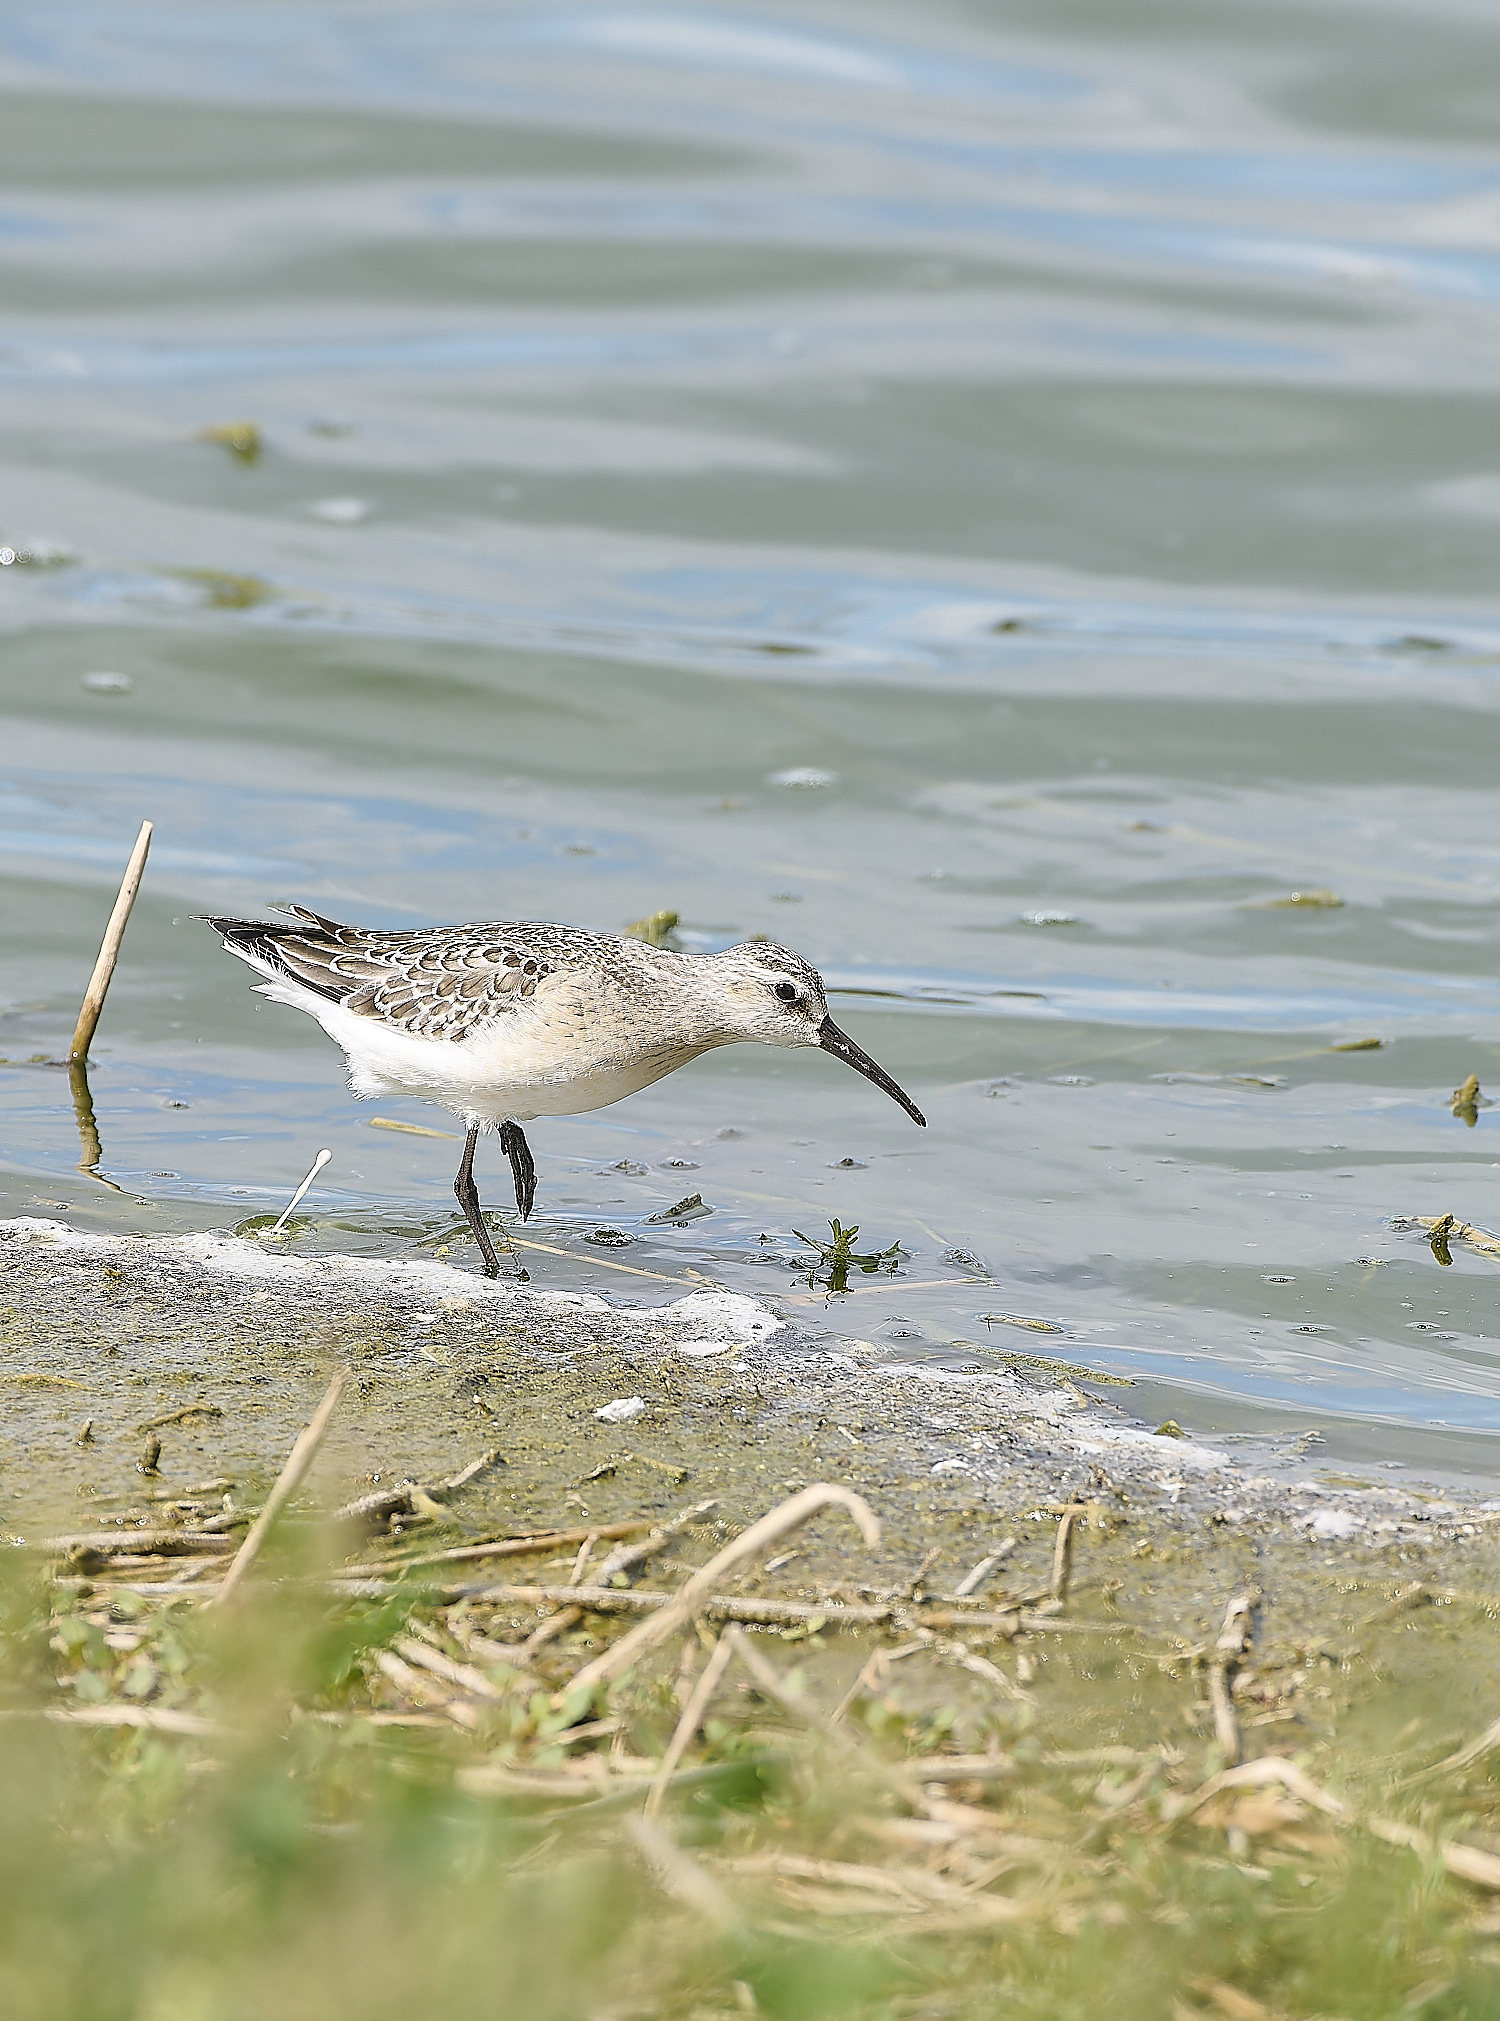 CantleyCurlewSandpiper050920-4-NEF-